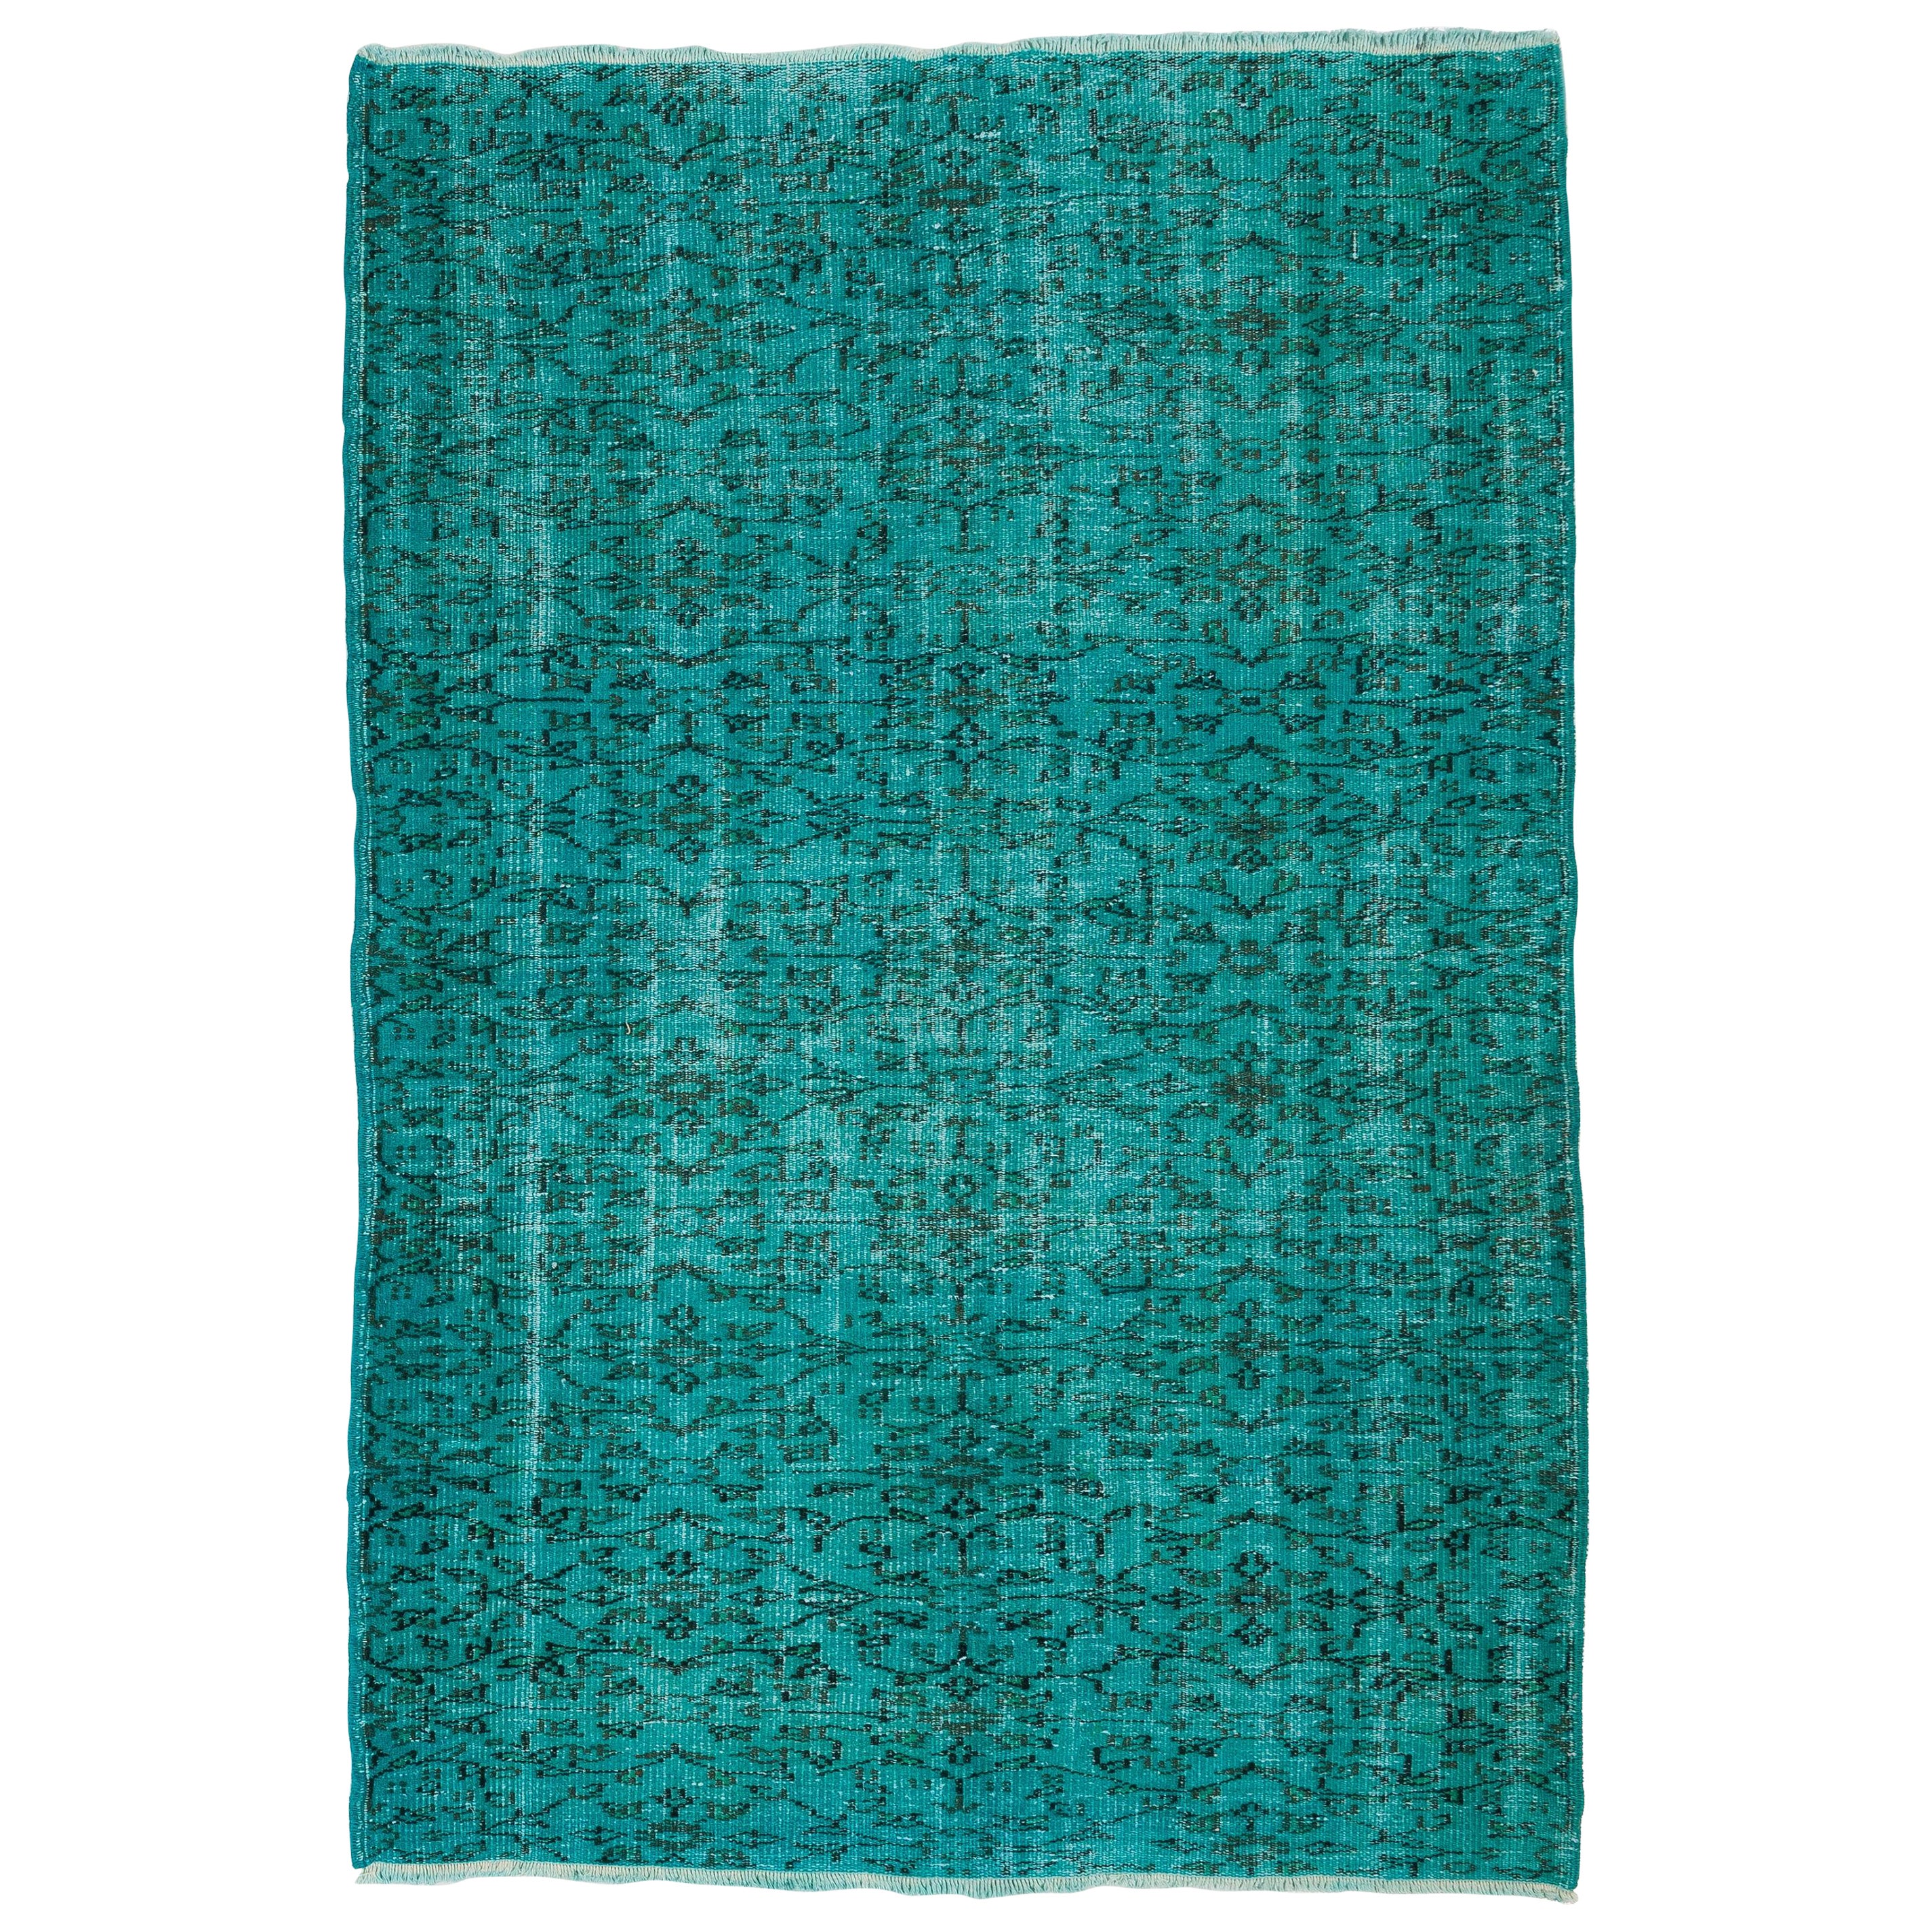 5x7.4 Ft Handmade Vintage Turkish Area Rug Over-Dyed in Teal 4 Modern Interiors